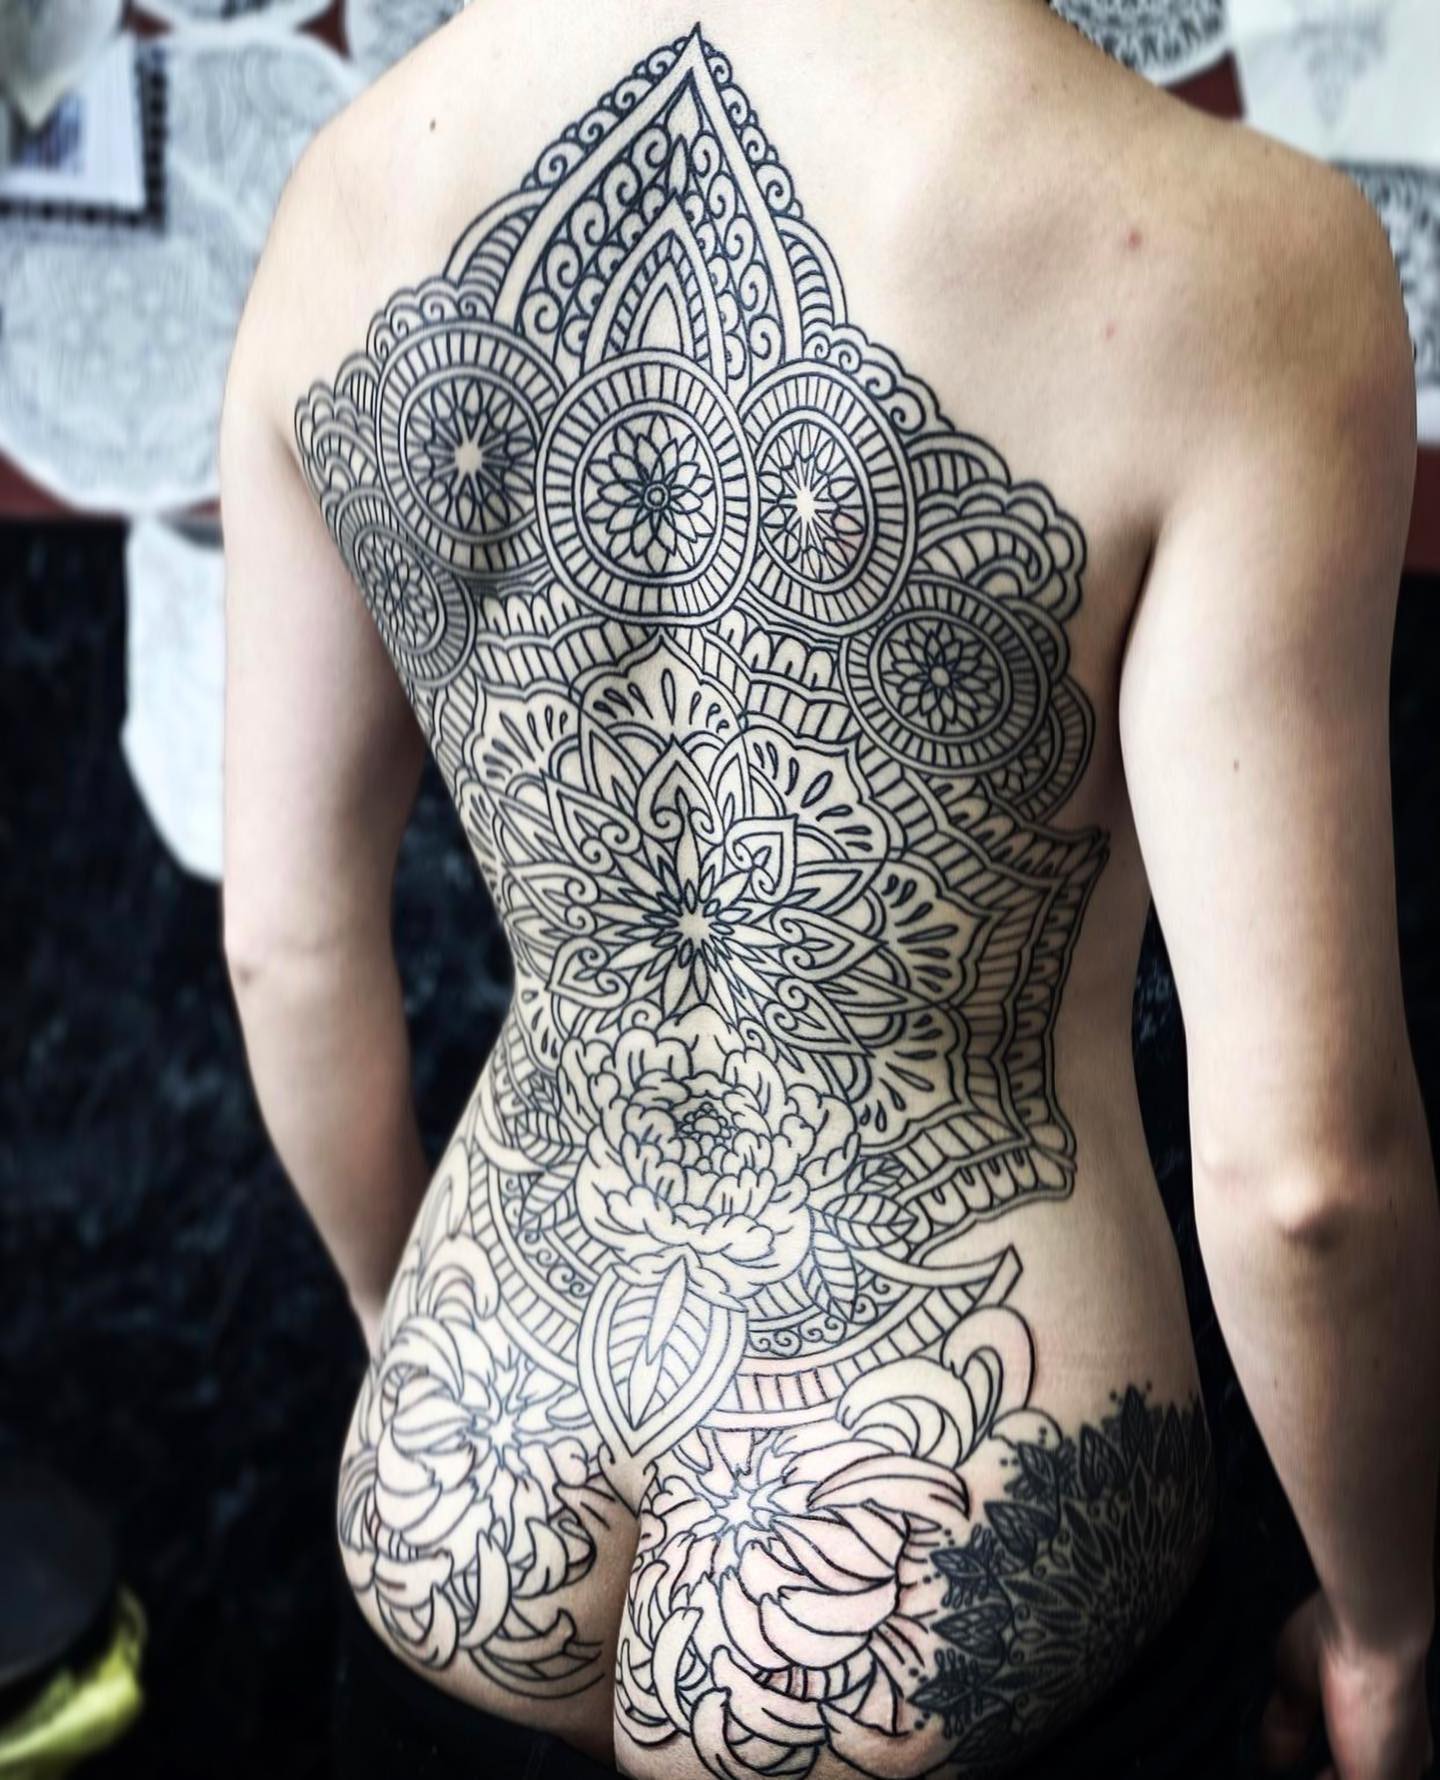 Back piece by marcdiamondtattoo 

💌 - For enquiries fill out the enquiry form on our website, LINK IN BIO.
_____________________________________

                         totaltattoo barber_dts easytattoo_uk eternalink dynamiccolor lockdownneedle stencilstuff  